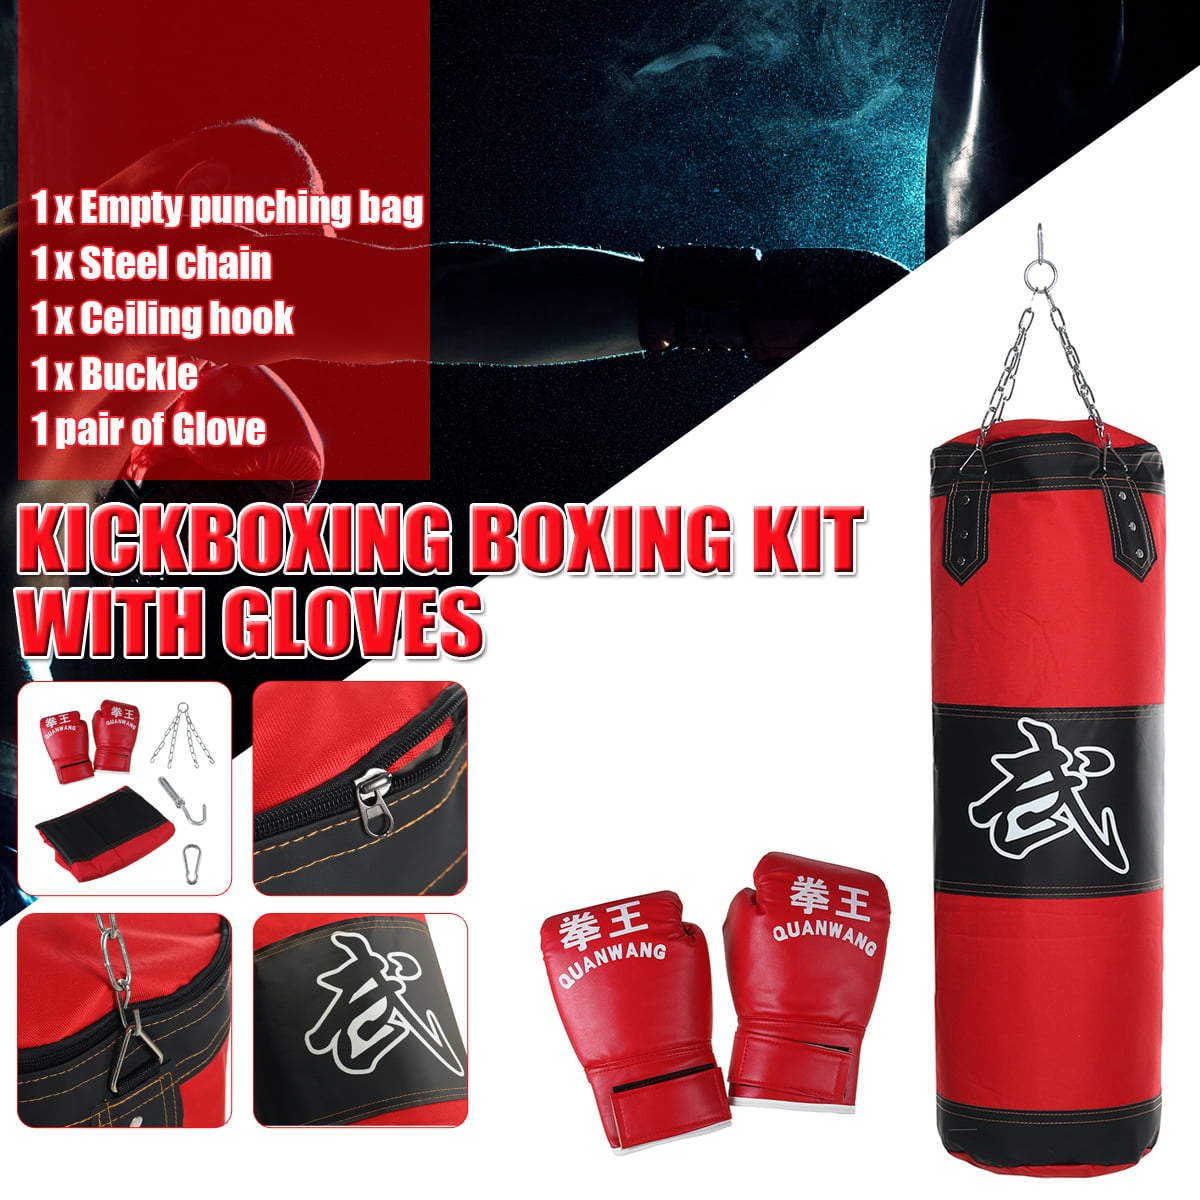 Punching Bag Kickboxing Boxing Kit With Gloves Chain Suspension Empty Bag | Walmart Canada